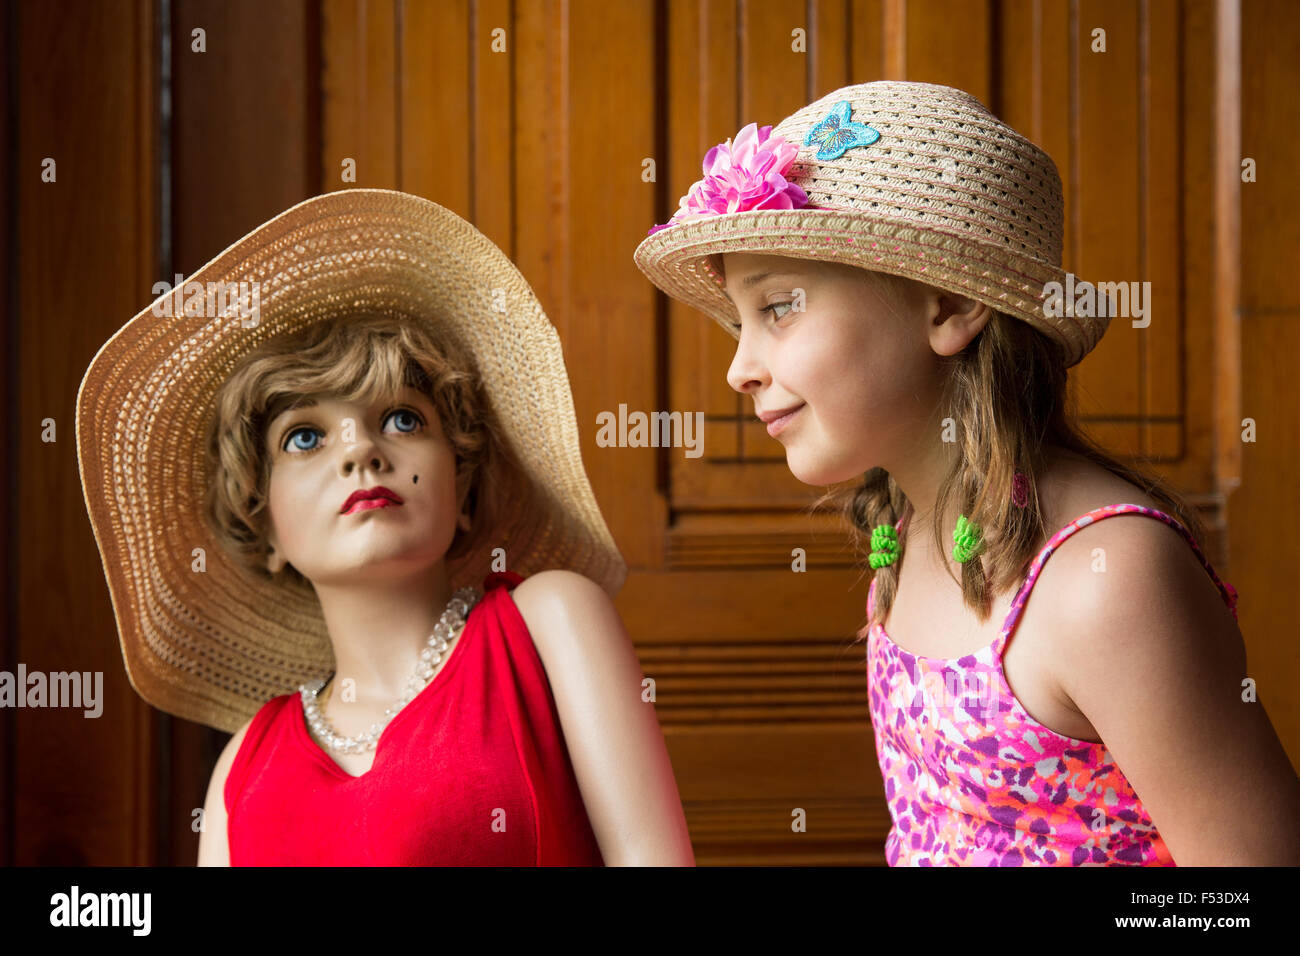 Young girl in a hat looking at a mannequin wearing a red dress and hat. Soft lighting and focus with warm vintage tones and look Stock Photo